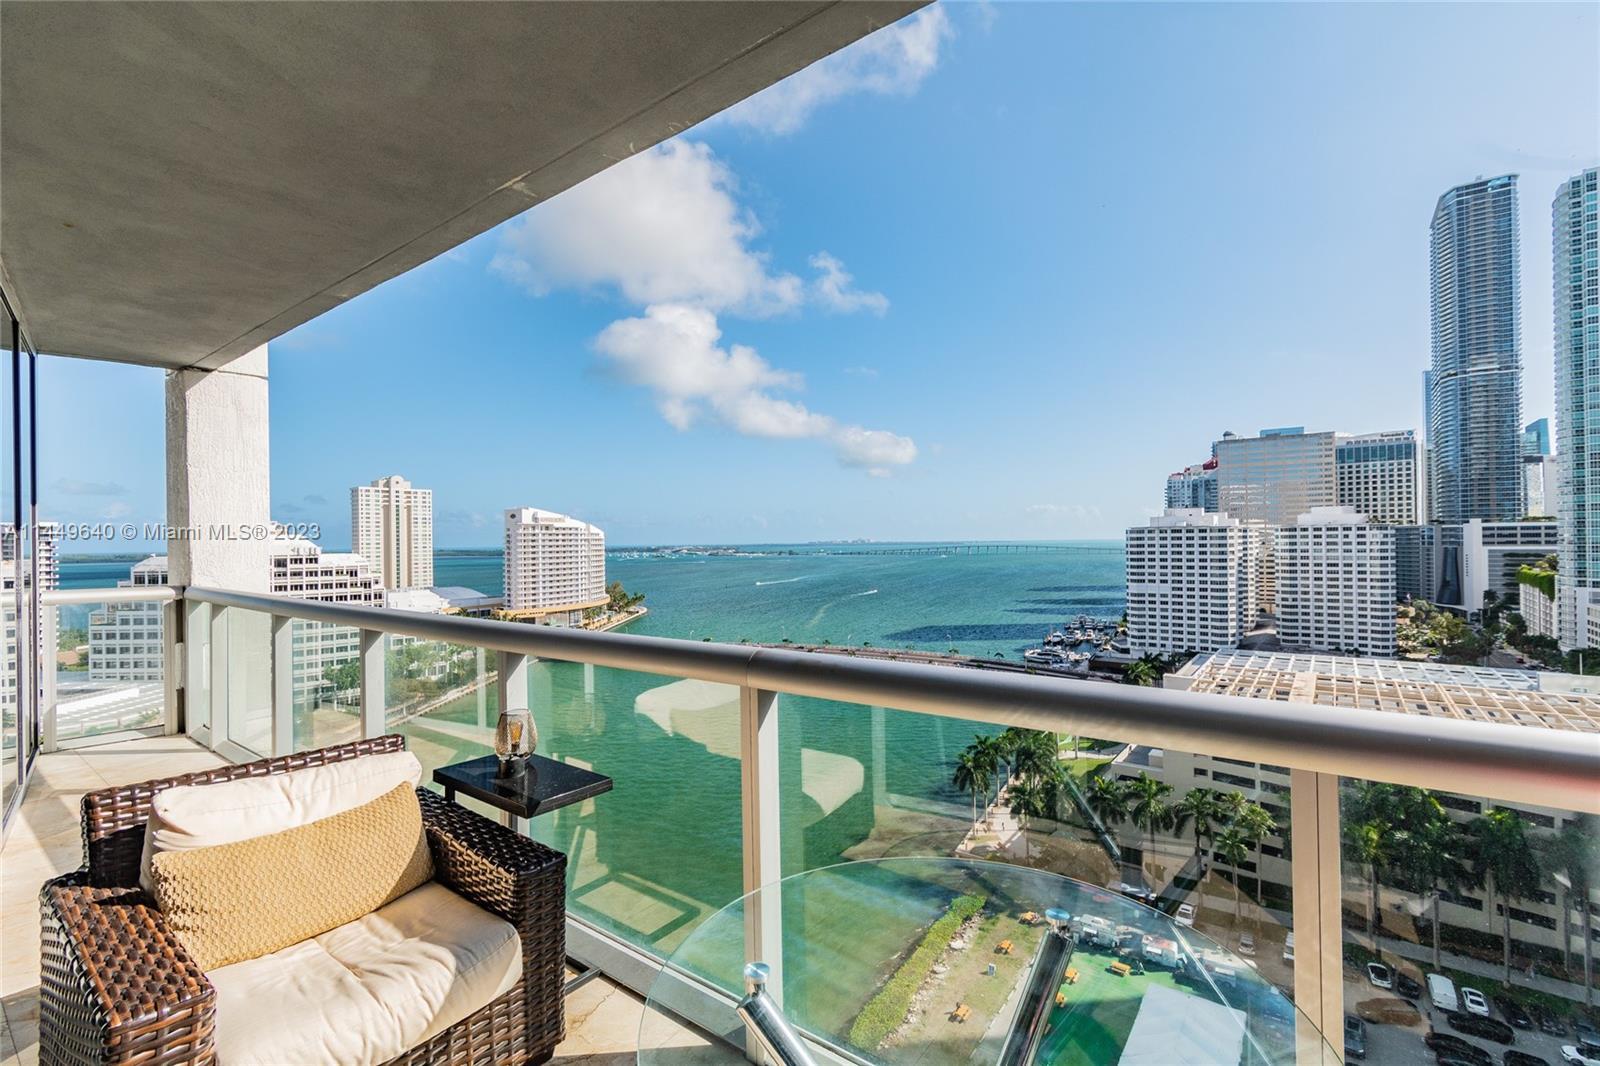 Luxury living at ICON BRICKELL. One of a kind, impeccable maintained unit, 3 Bedrooms, 2 Baths, 1,87